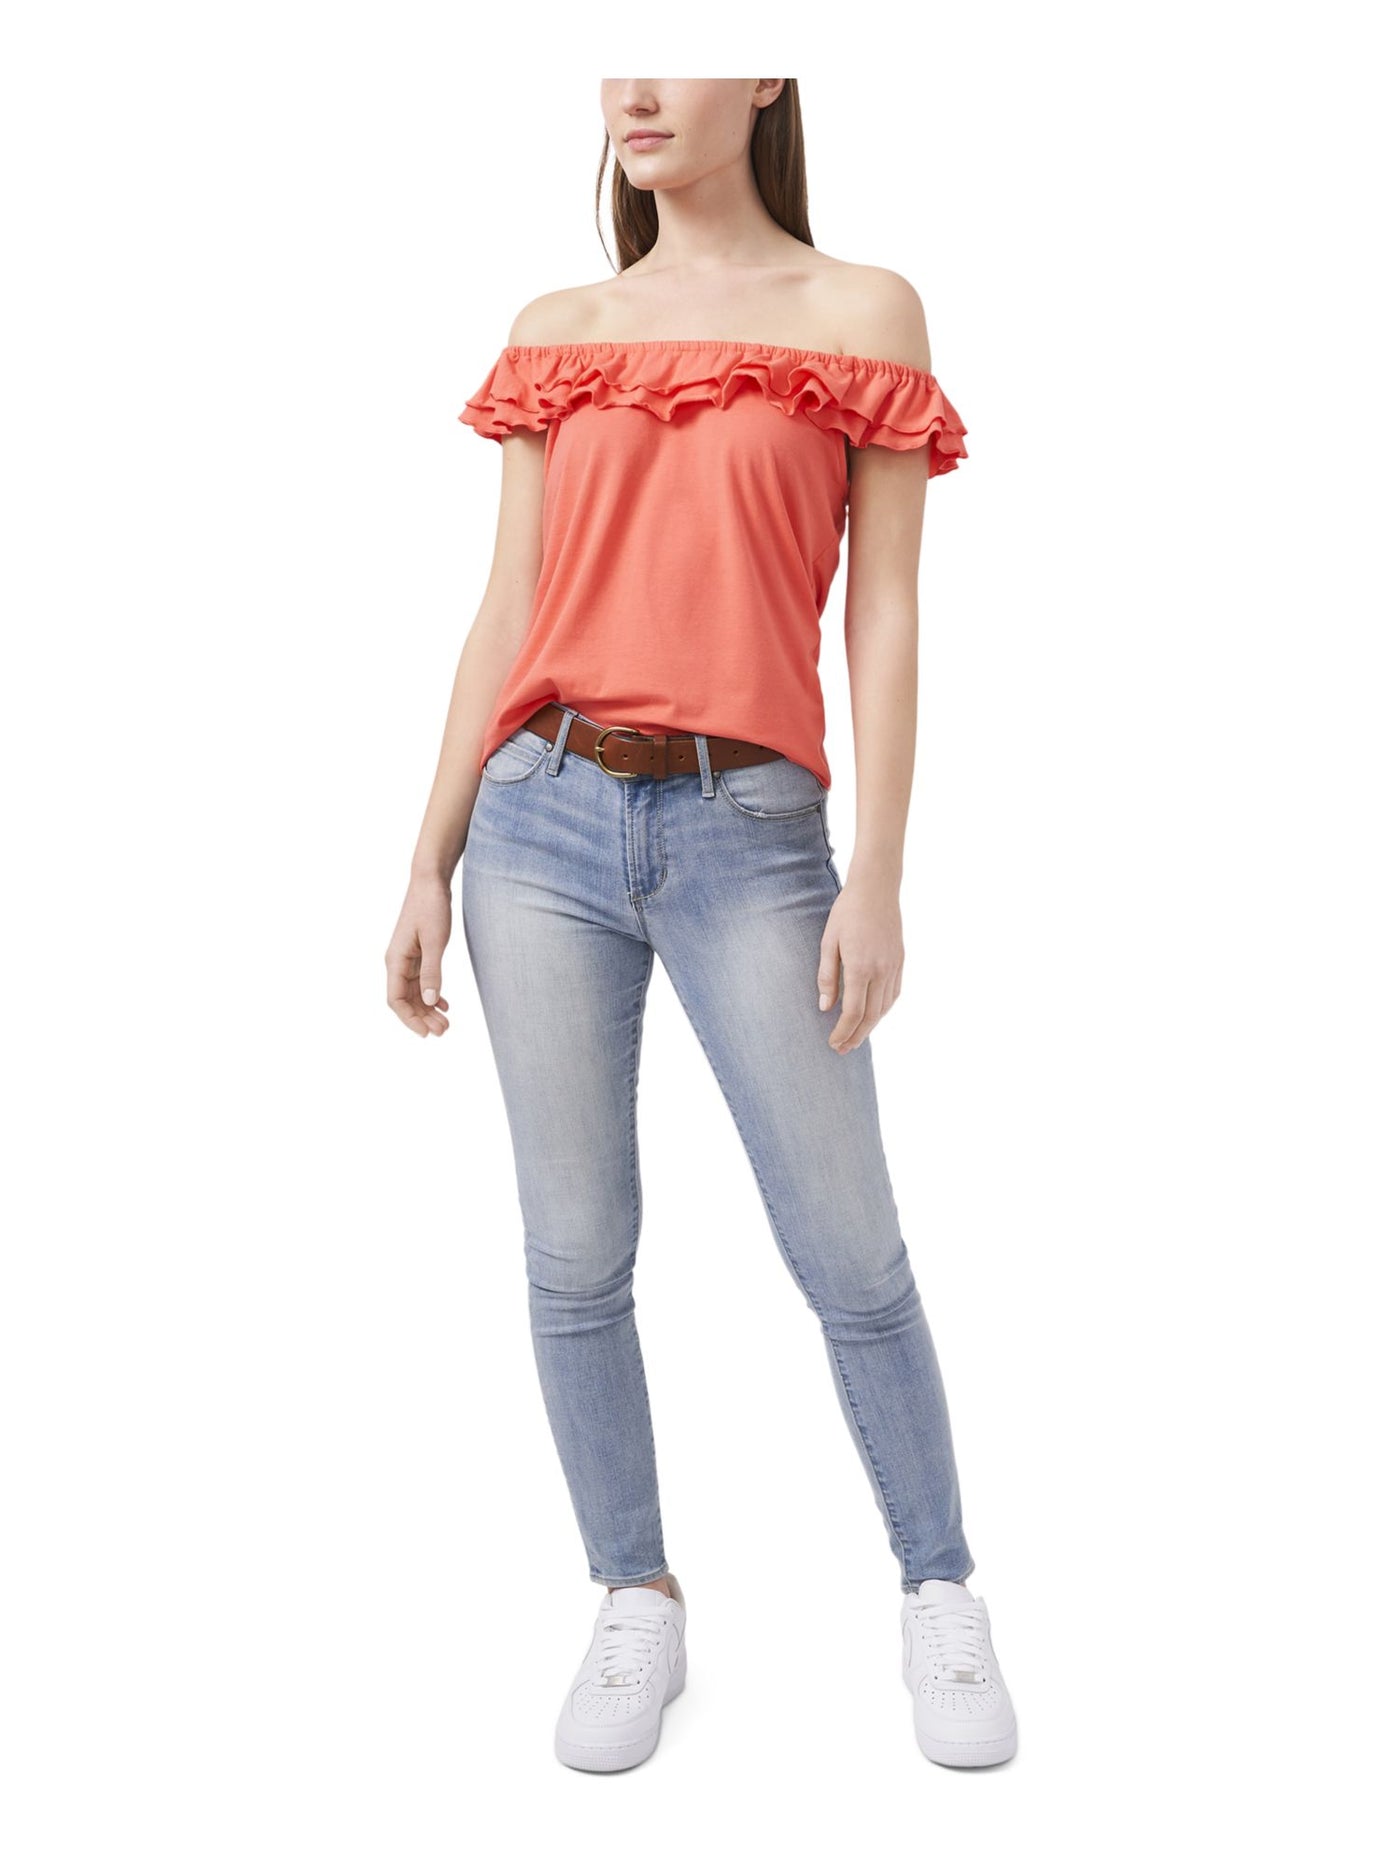 RILEY&RAE Womens Coral Stretch Off Shoulder Top S